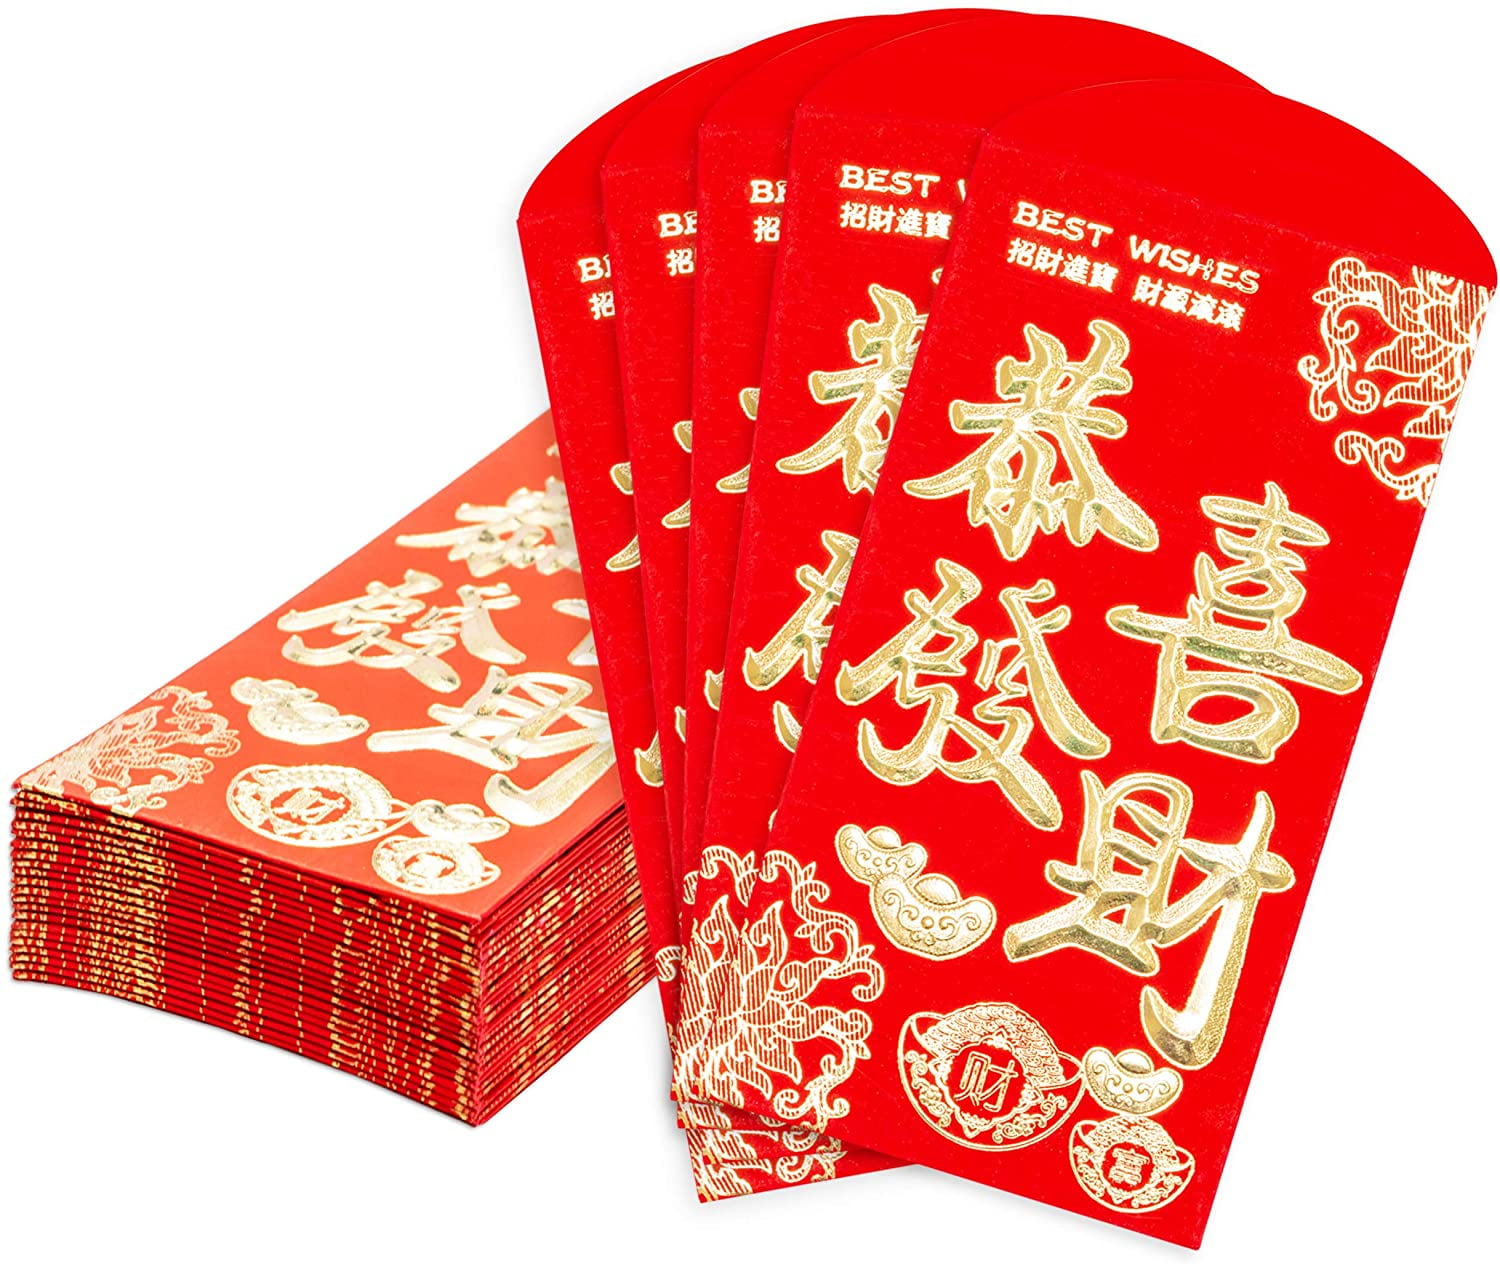 Chinese New Year Red Envelopes Gift Money Envelopes 25-Count Chinese Red Packets Hong Bao with Gold Foil Design Gong Xi FA CAI 3.5 x 6.4 Inches 